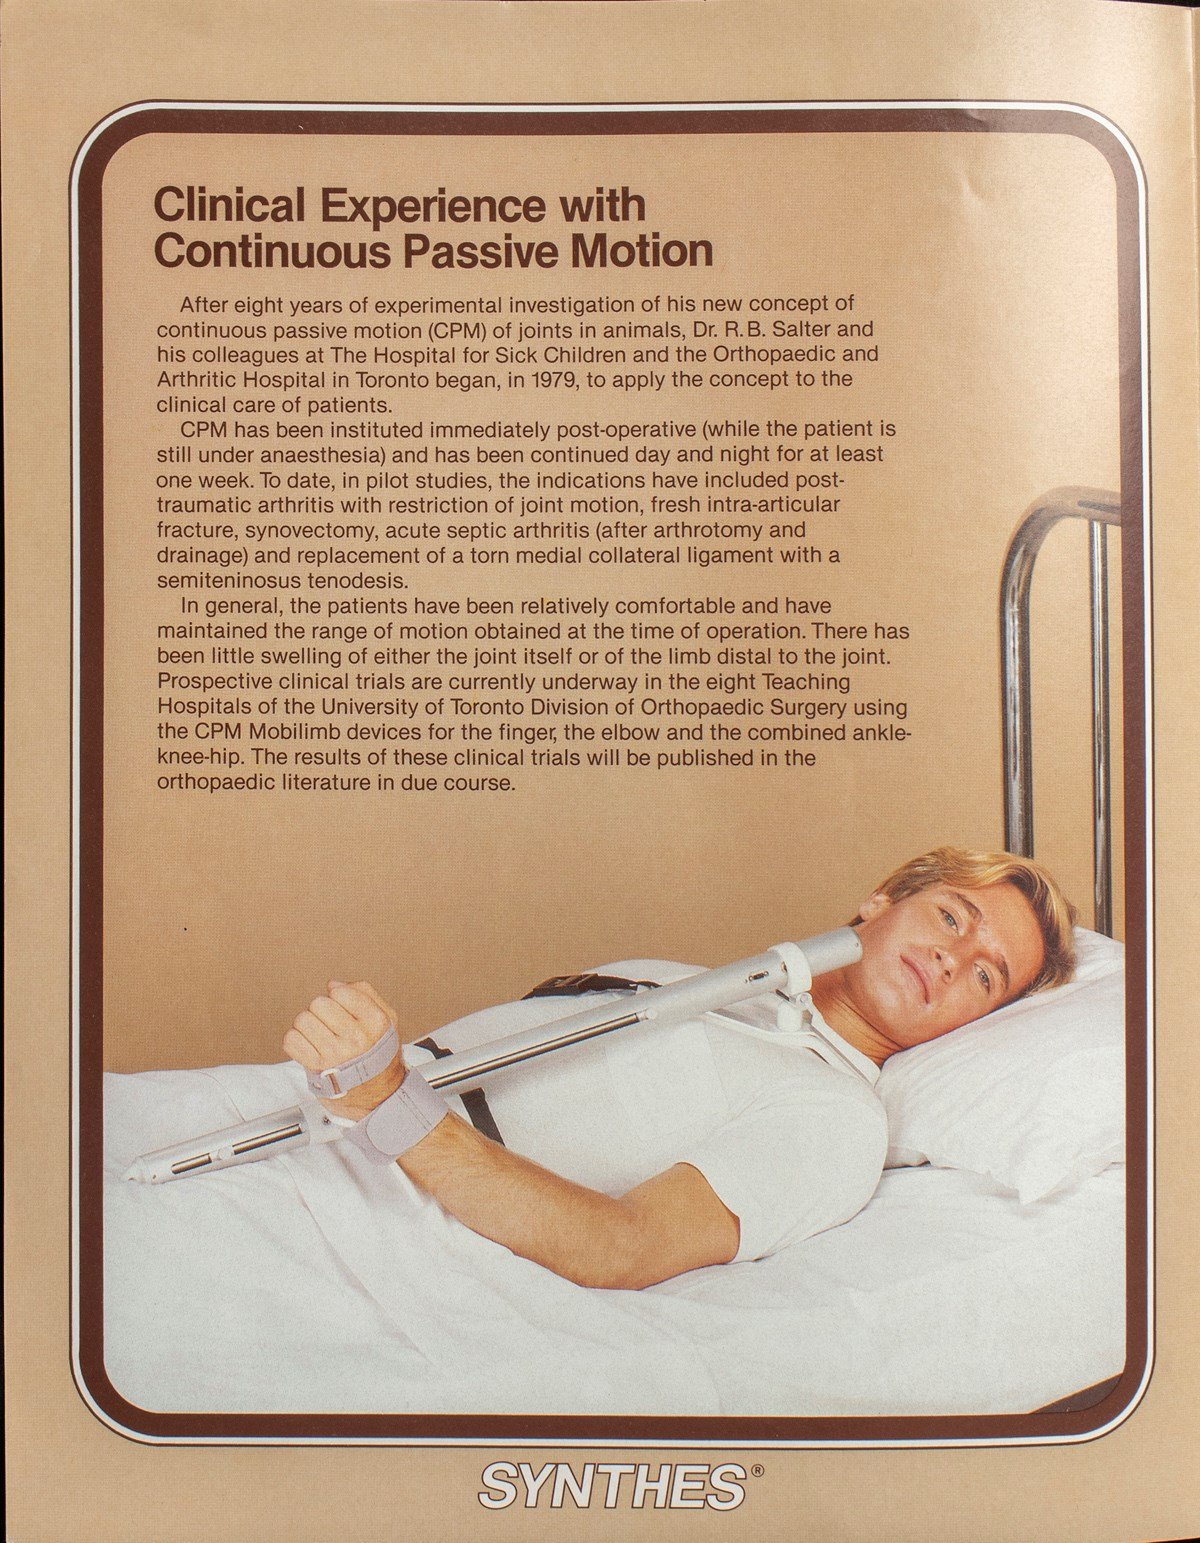 A poster of a man lying in a bed and wearing an orthotic device on arm that is connected to a bar that restricts his range of motion vertically. The headline reads "Clinical experience with continuous passive motion".